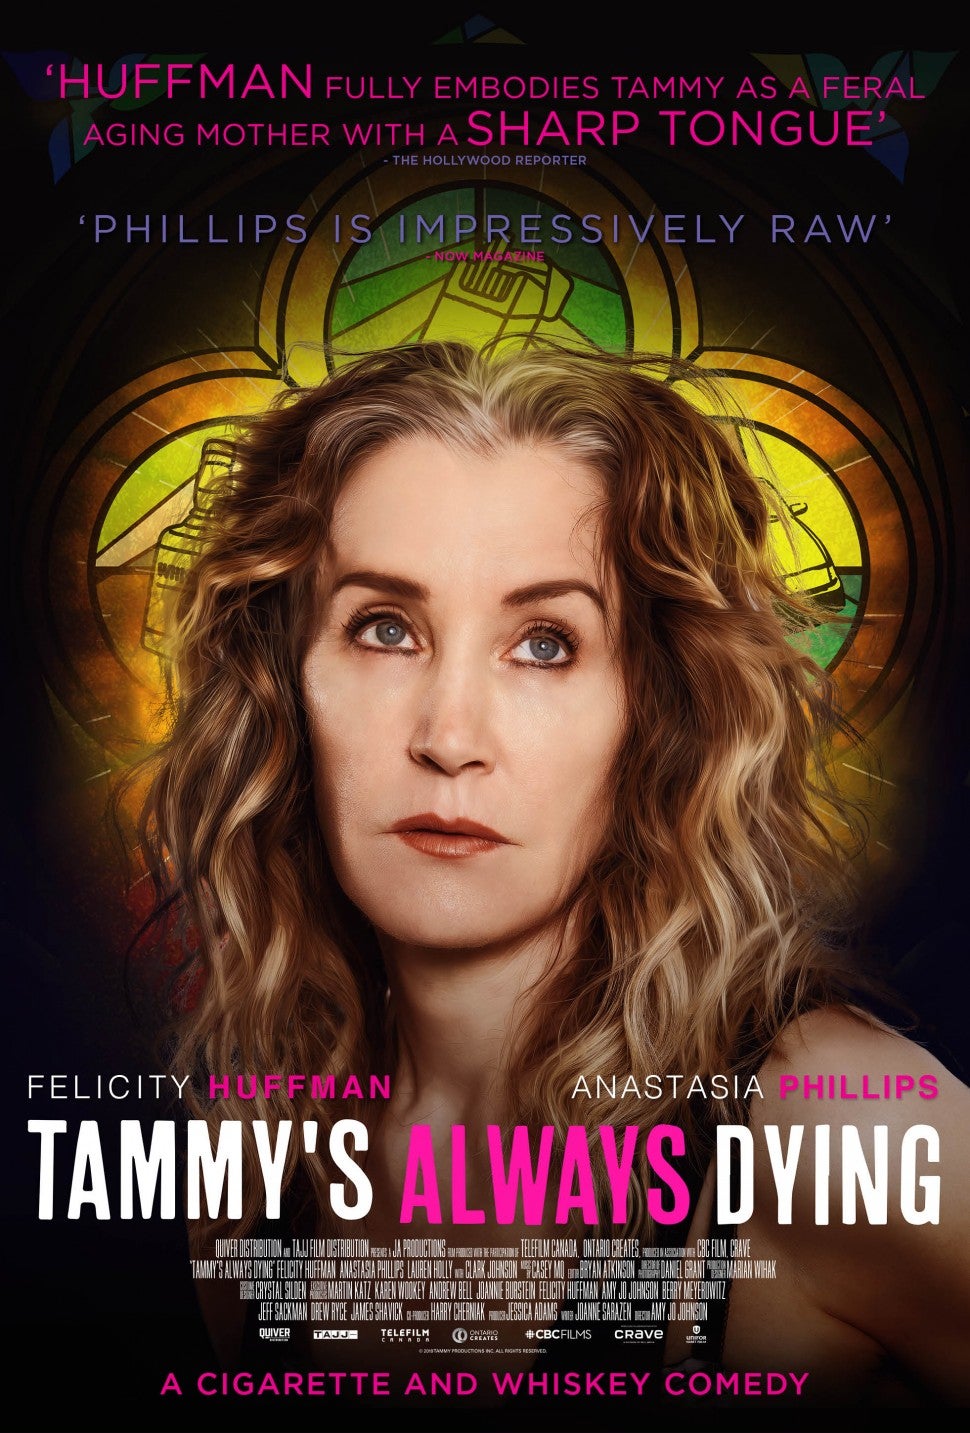 Felicity Huffman, Tammy's Always Dying